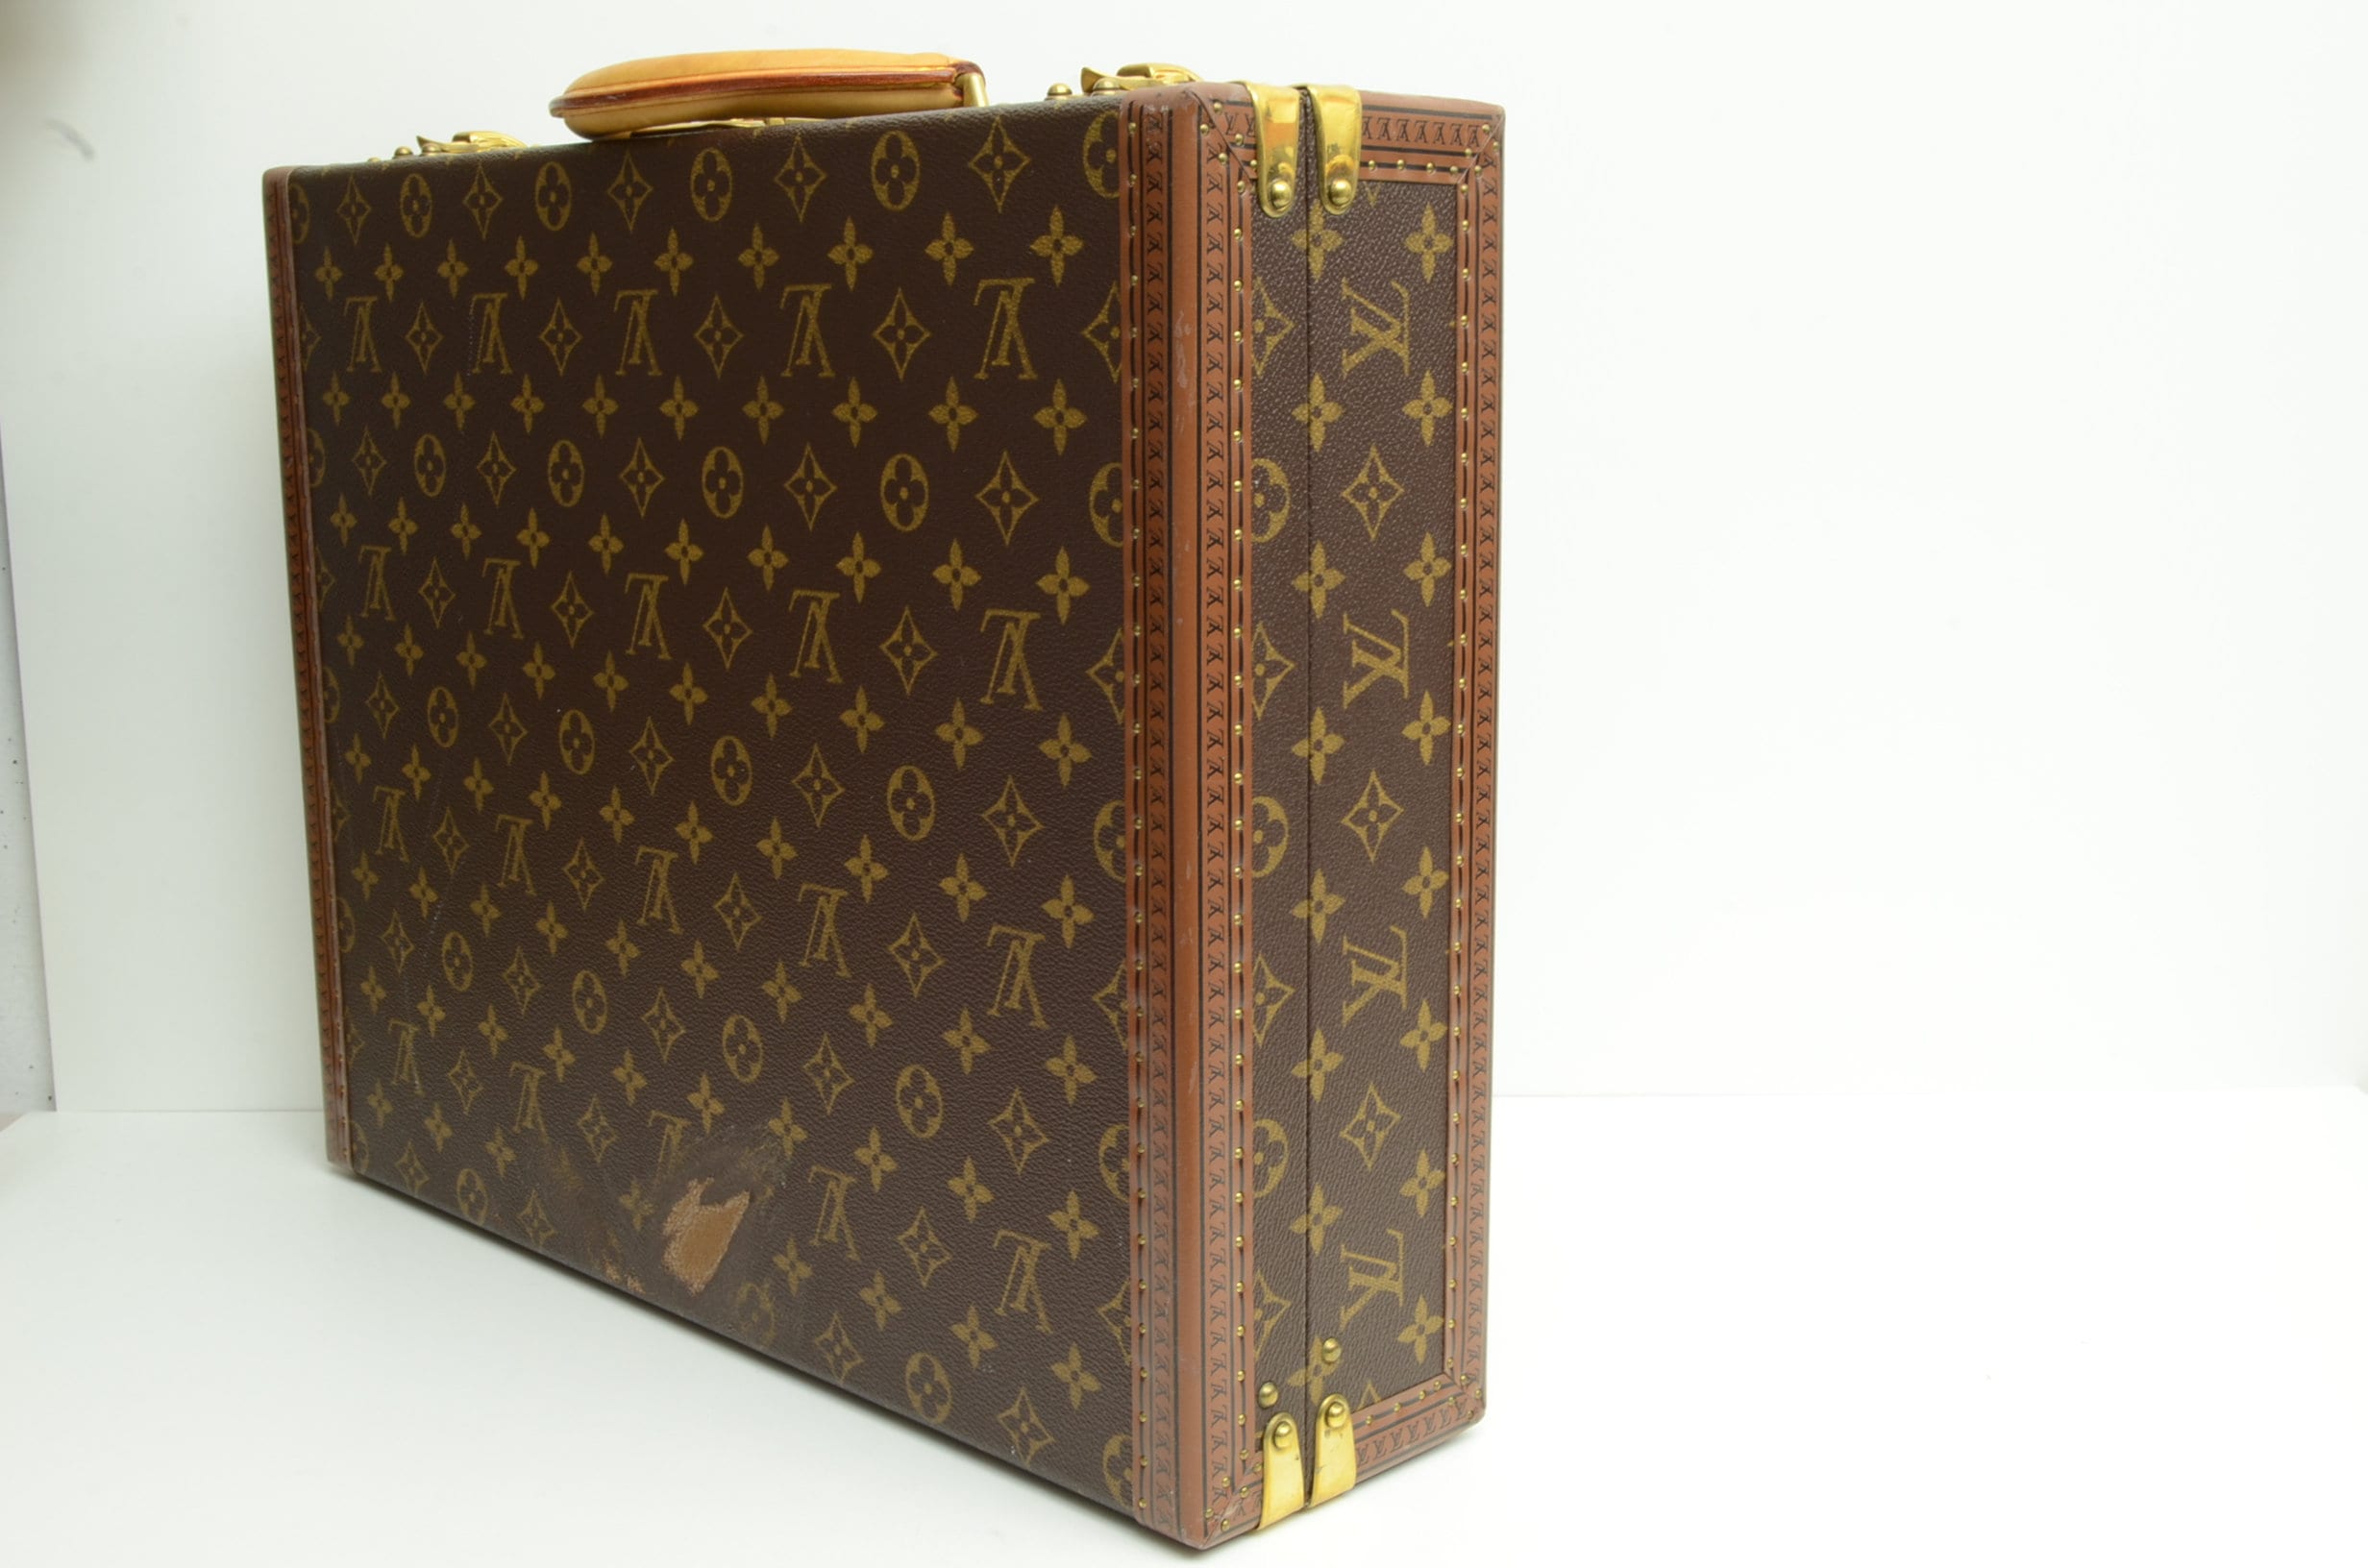 Authentic Louis Vuitton President Briefcase 1st Edition -  Israel